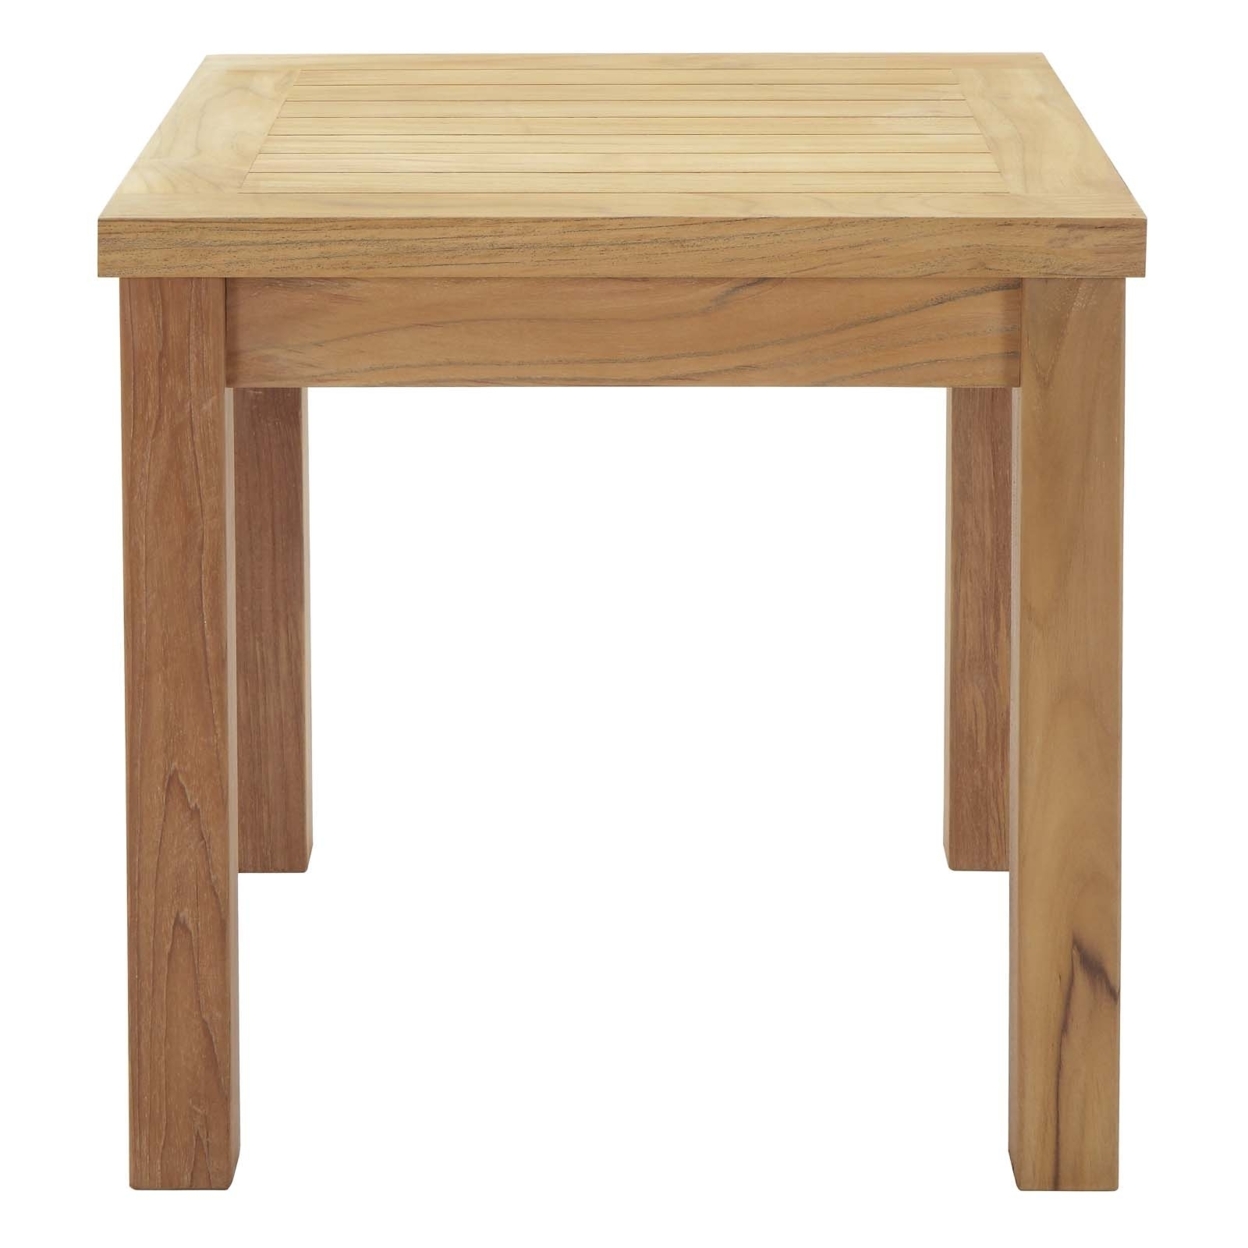 Natural Marina Outdoor Patio Teak Side Table - image 2 of 6